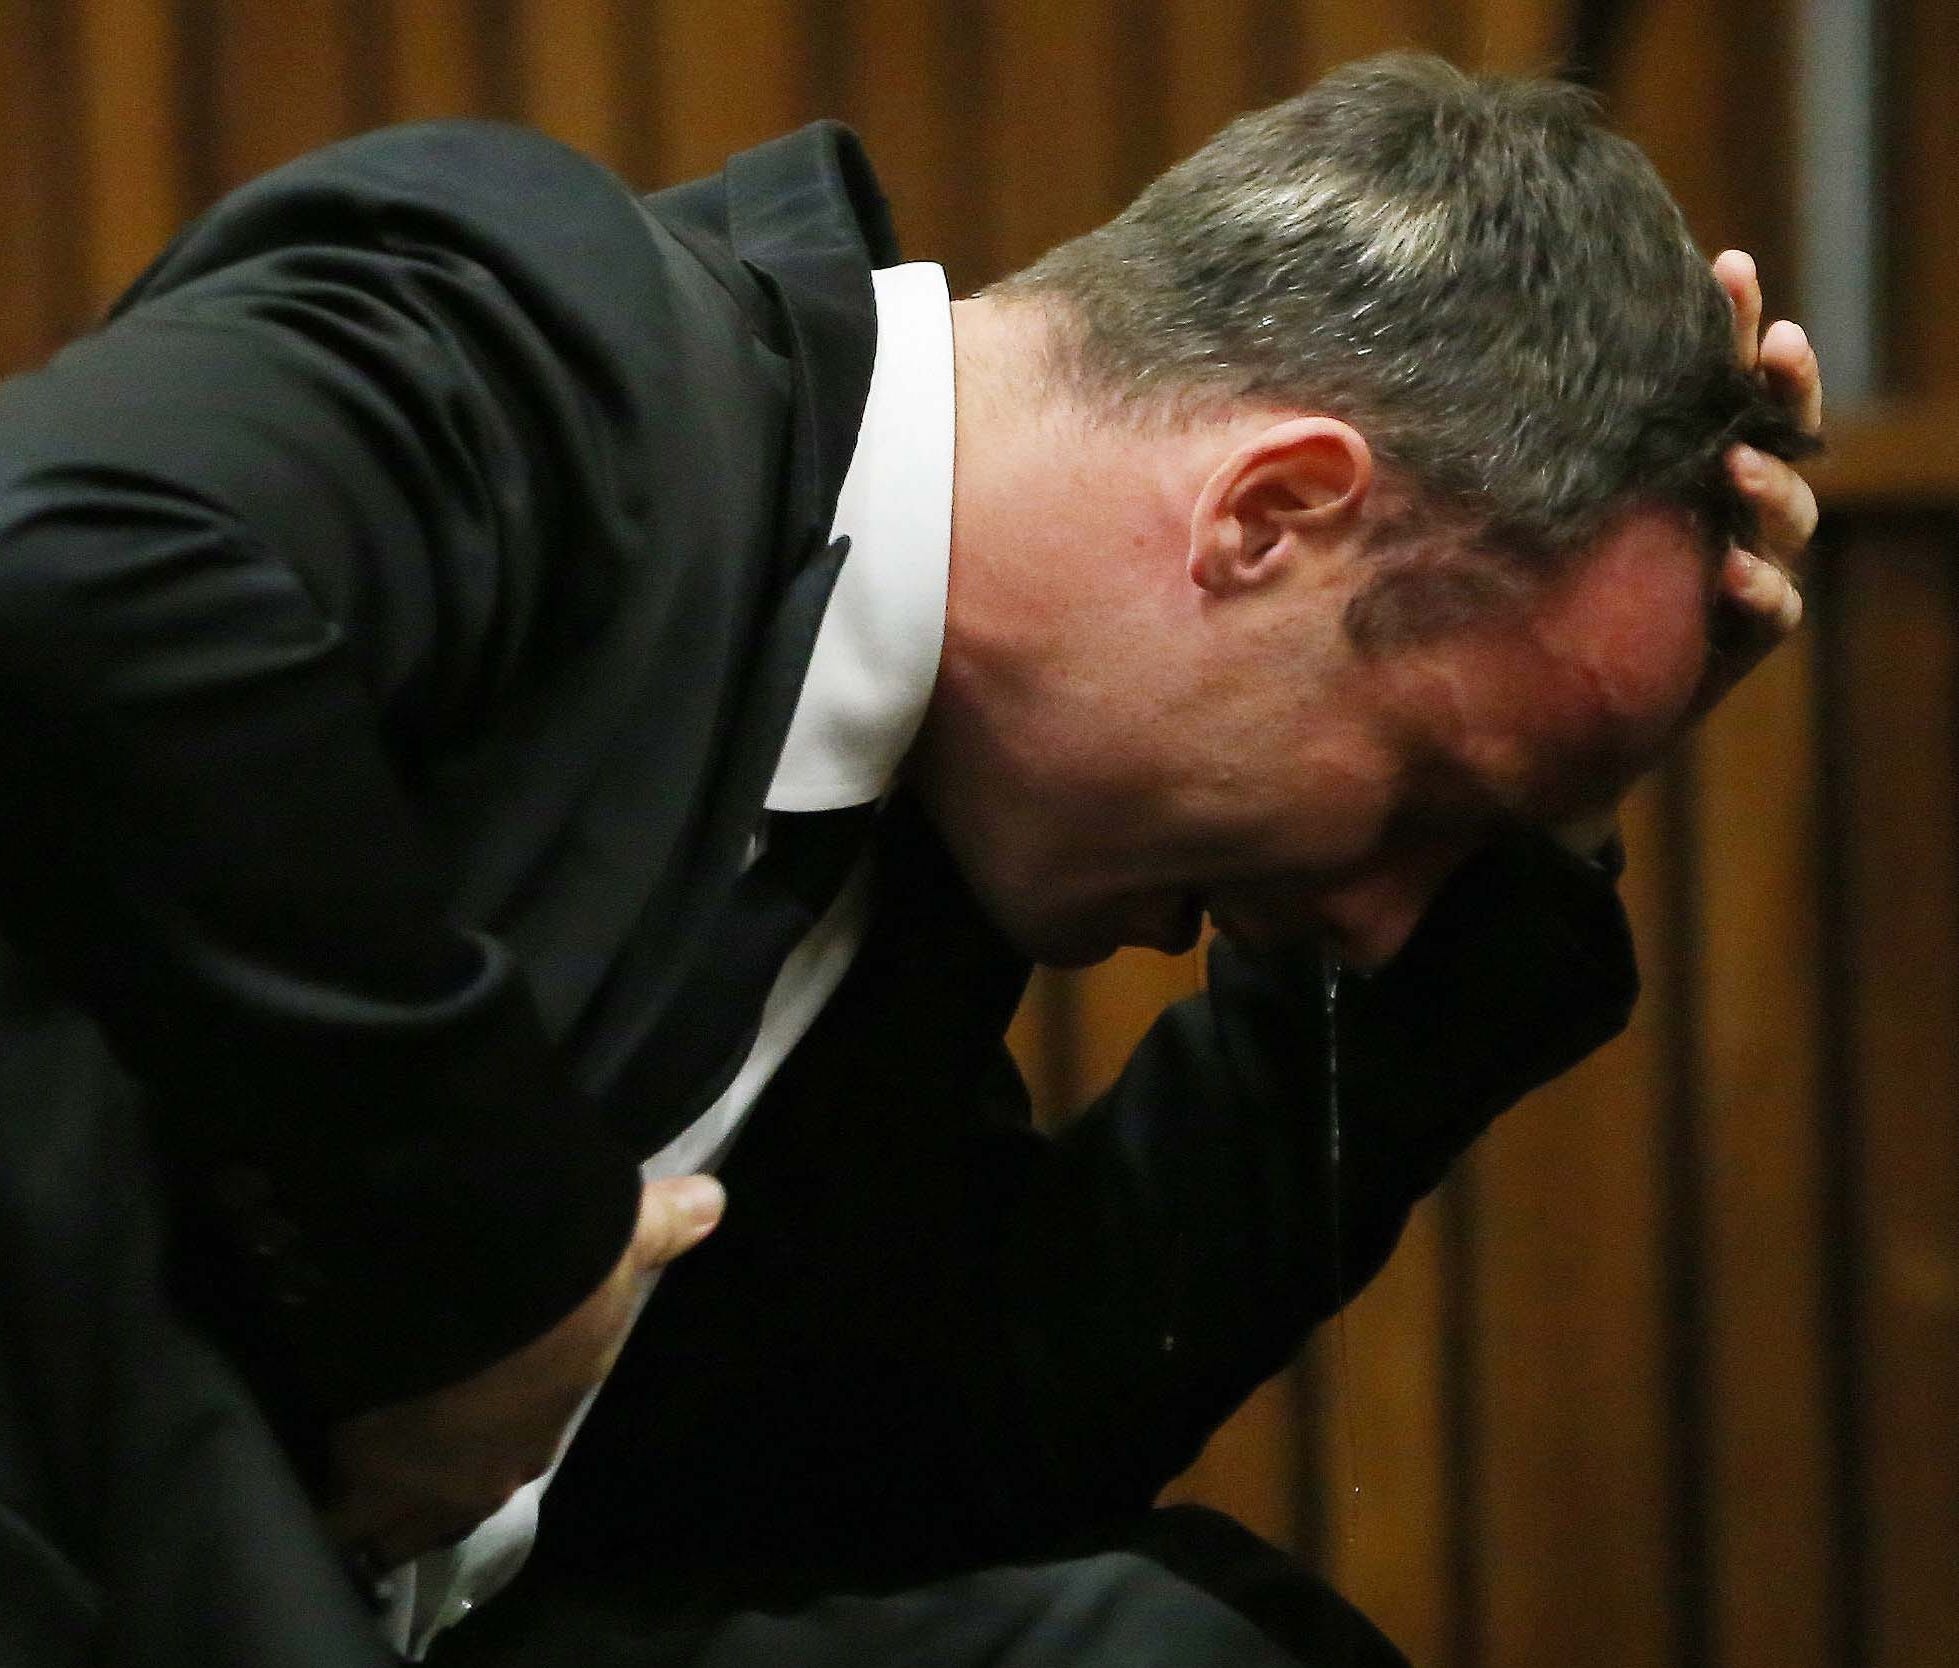 Oscar Pistorius weeps as he listens to evidence by a pathologist in court in Pretoria, South Africa, on April 7.